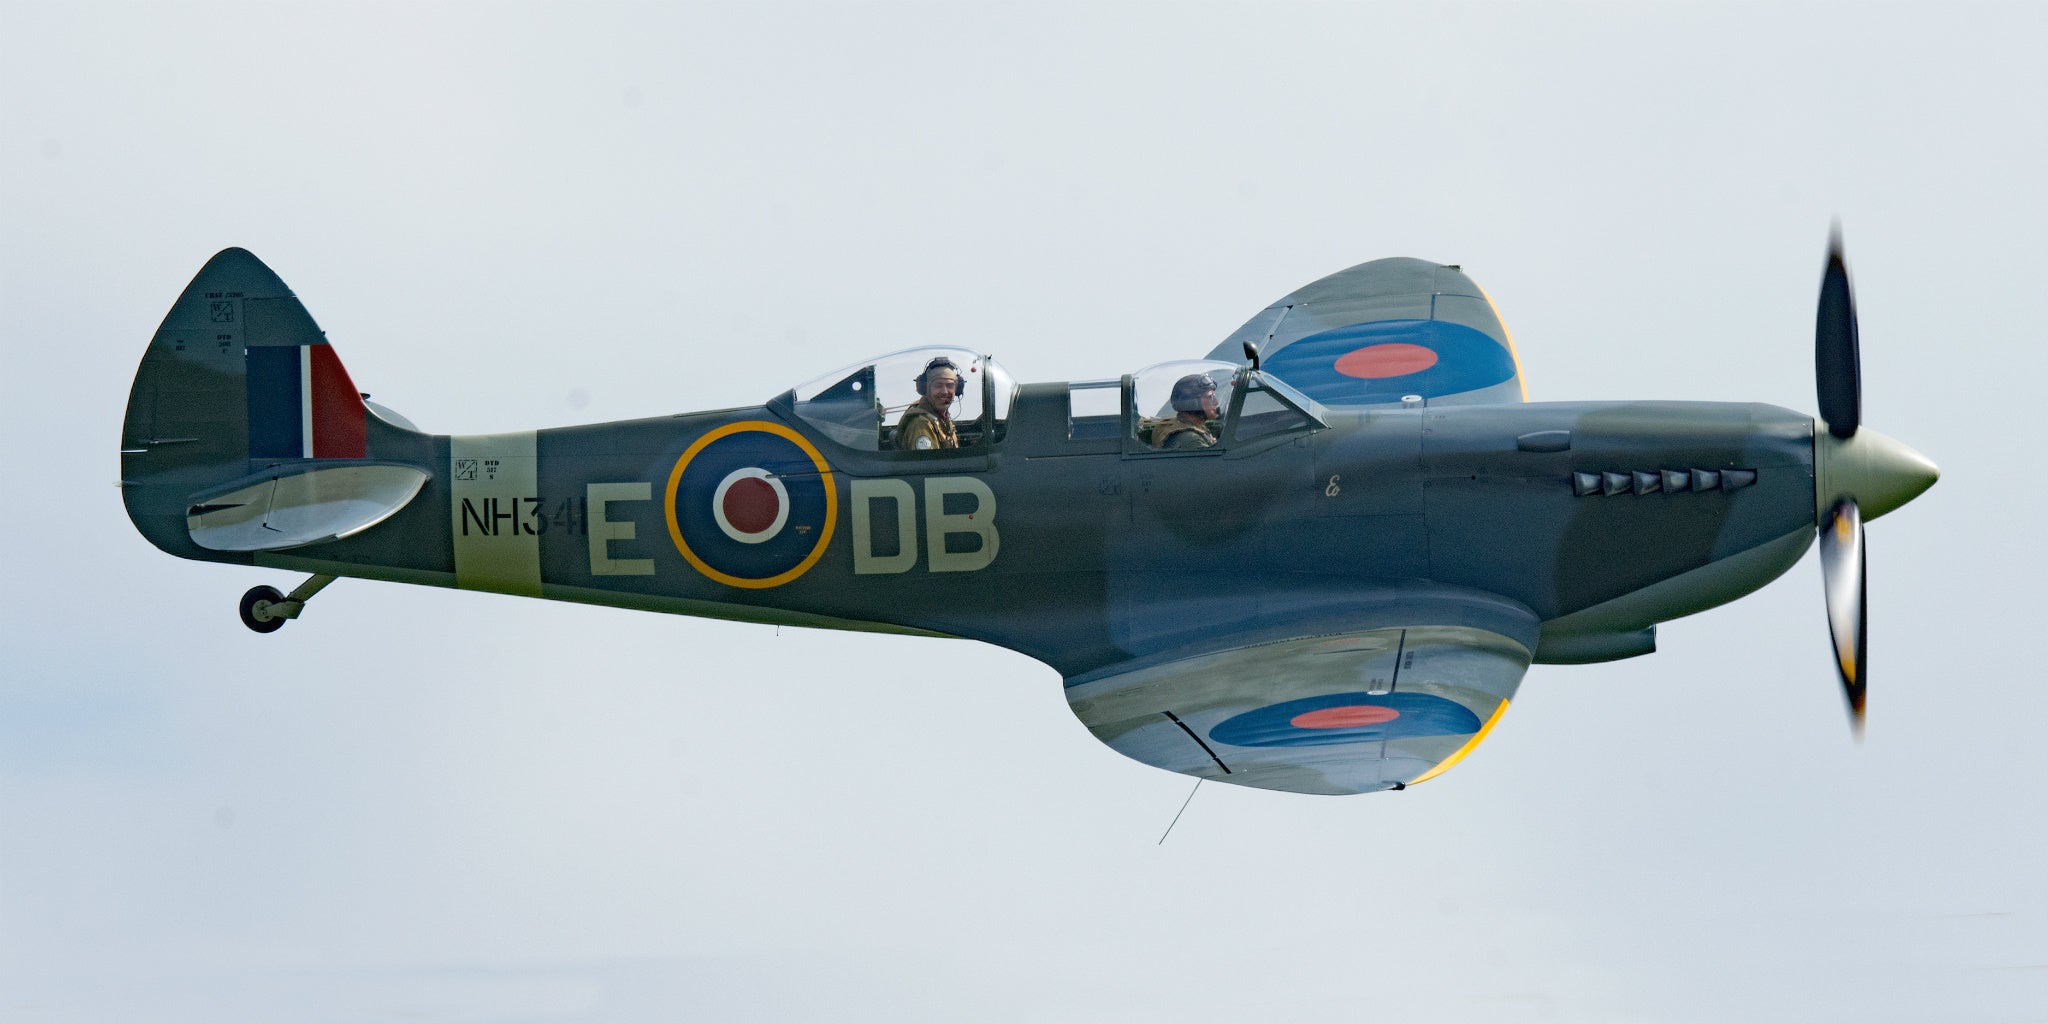 A stock image of a Spitfire being flown